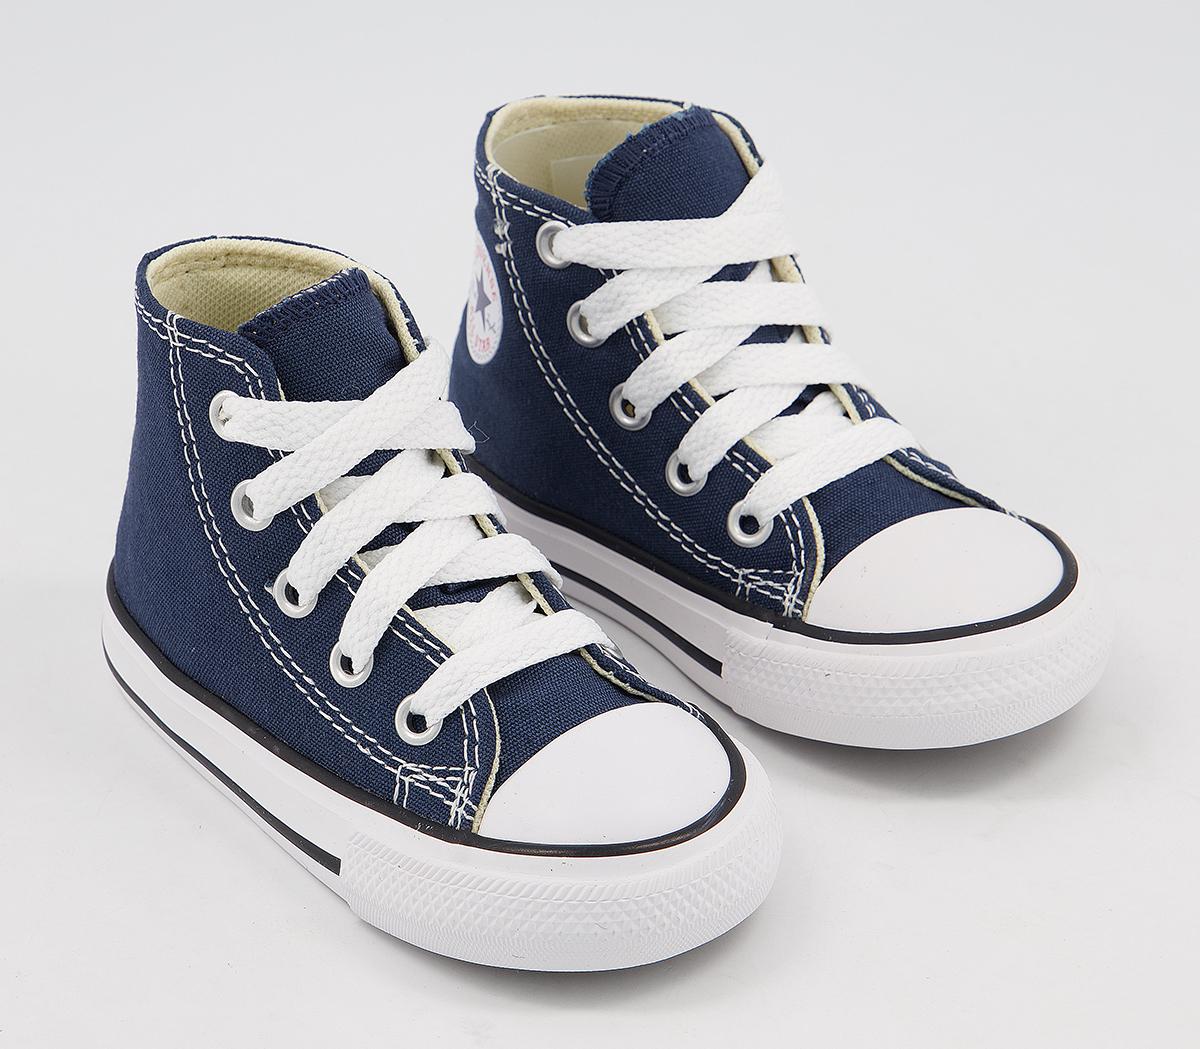 Kids Converse Baby Boys Small Star Hi Canvas In Navy Blue And White, 5 Infant